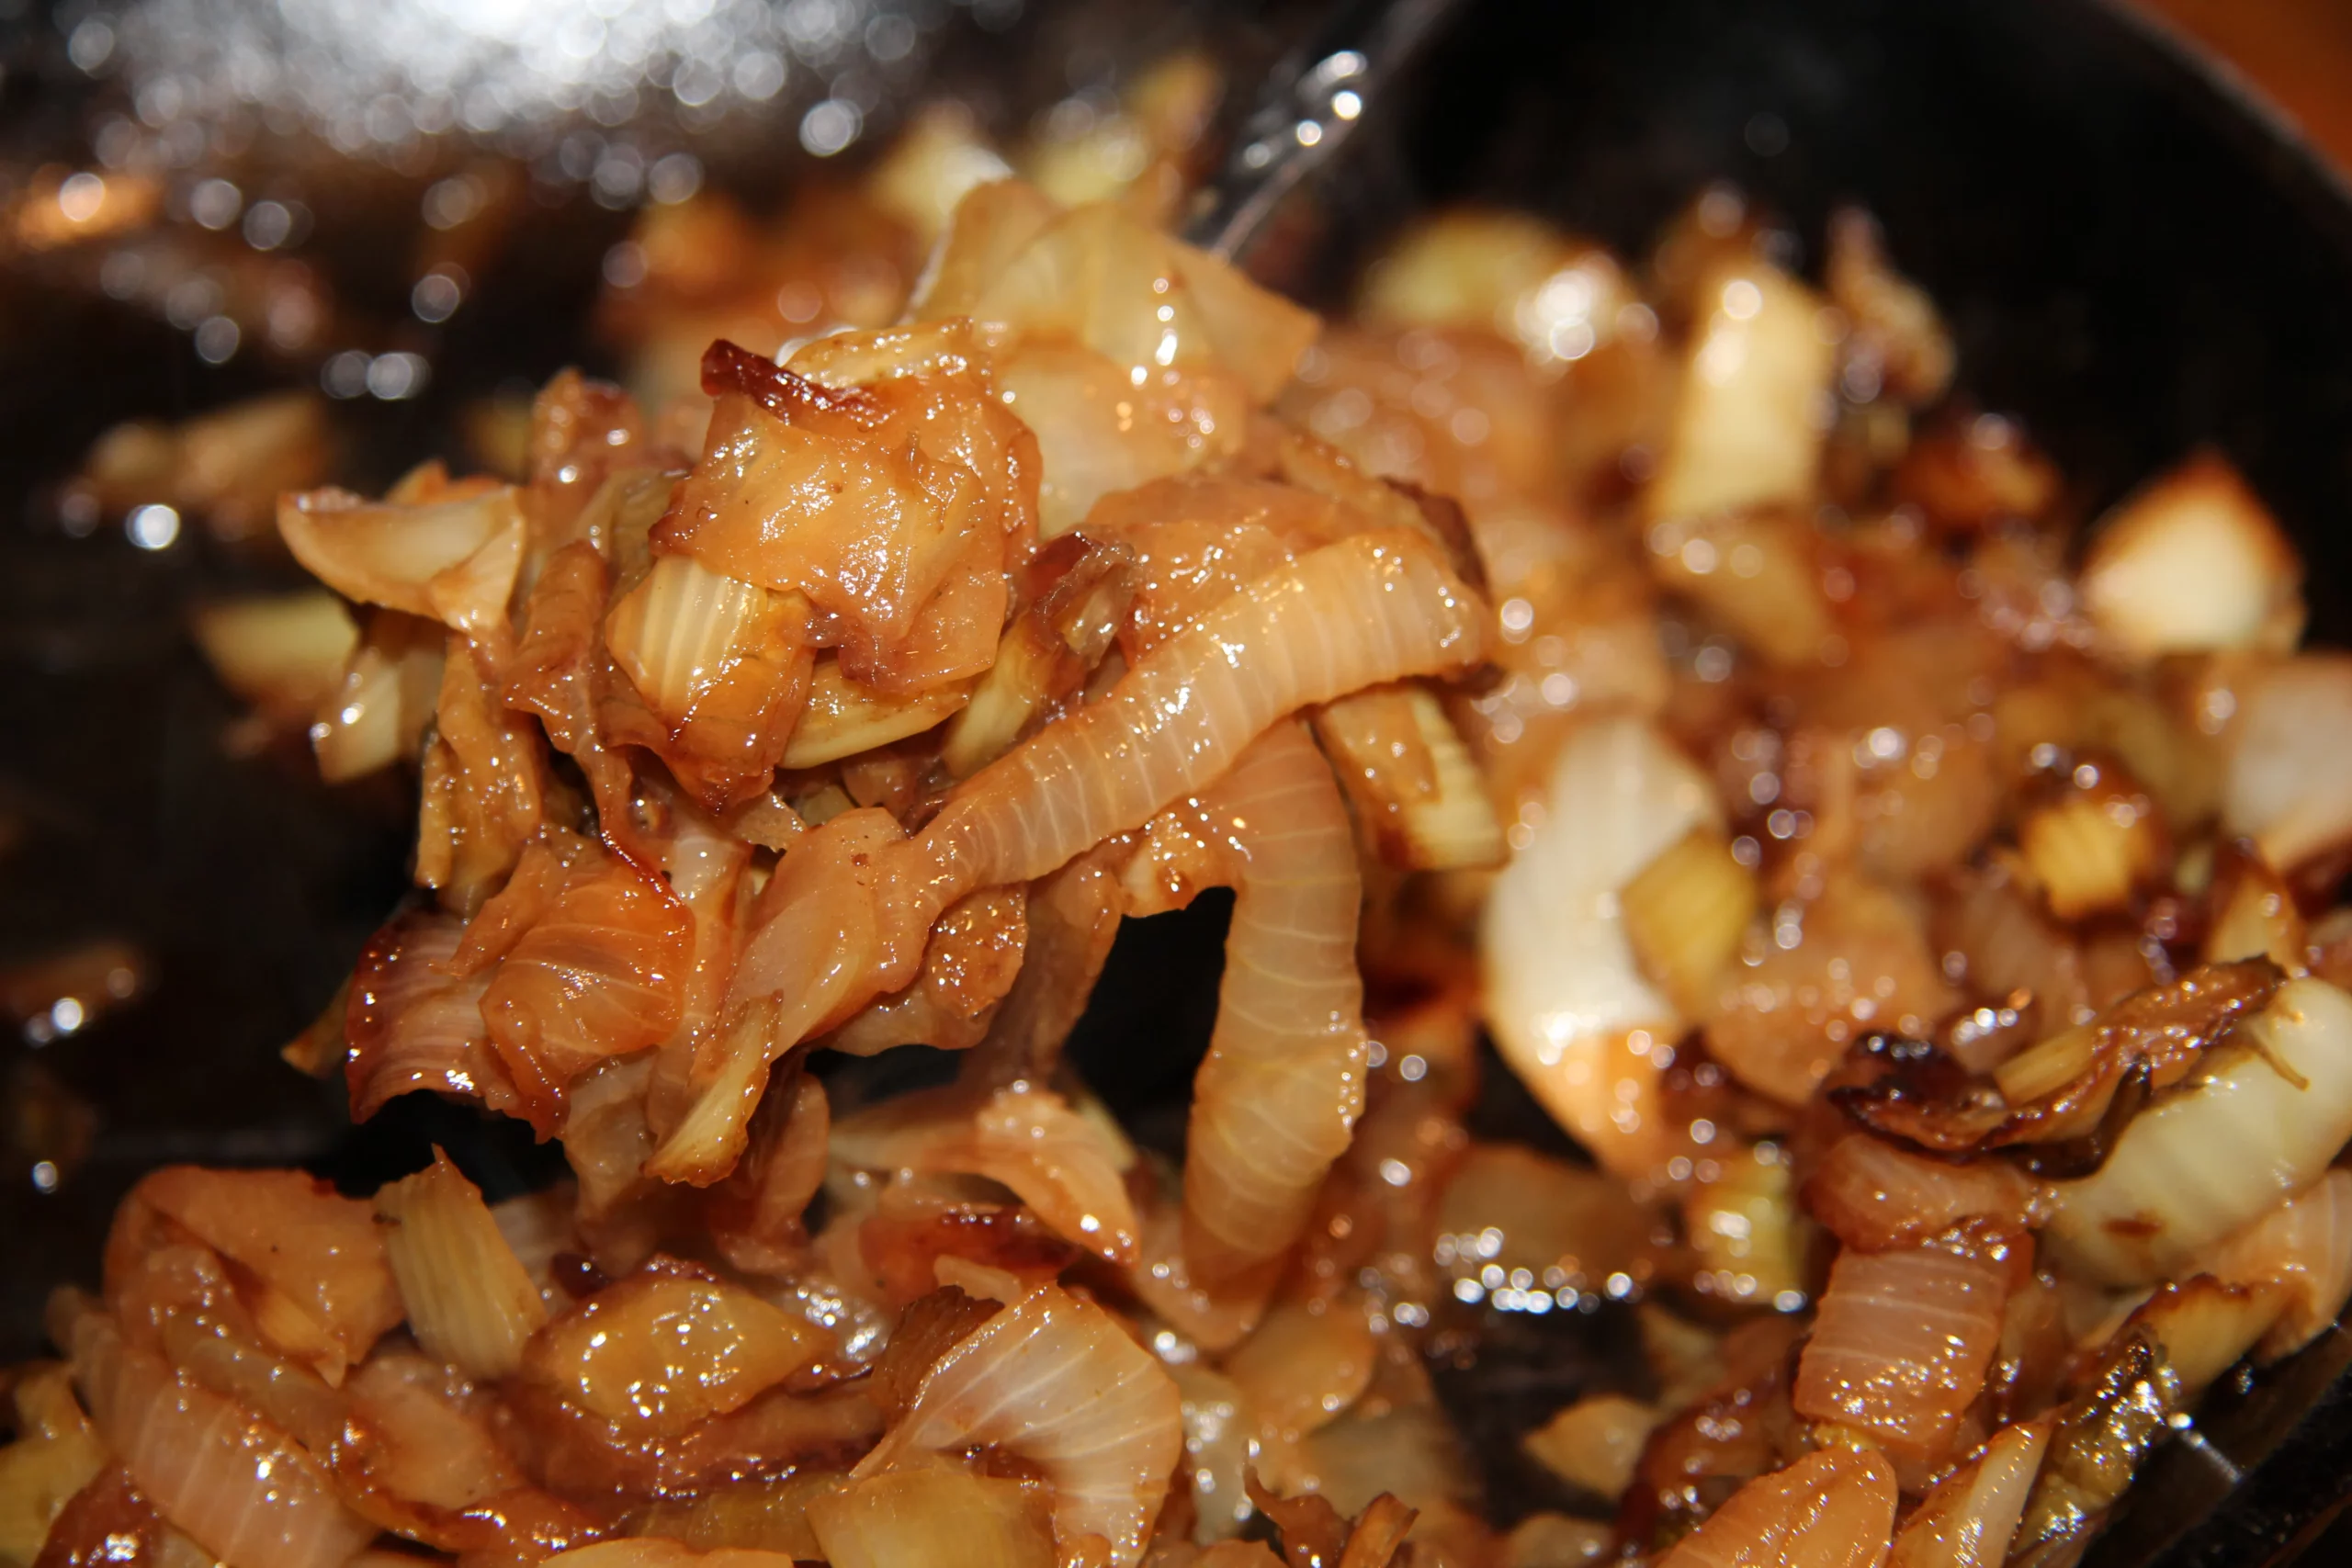 Featured image for “Caramelized Onion and Fennel”